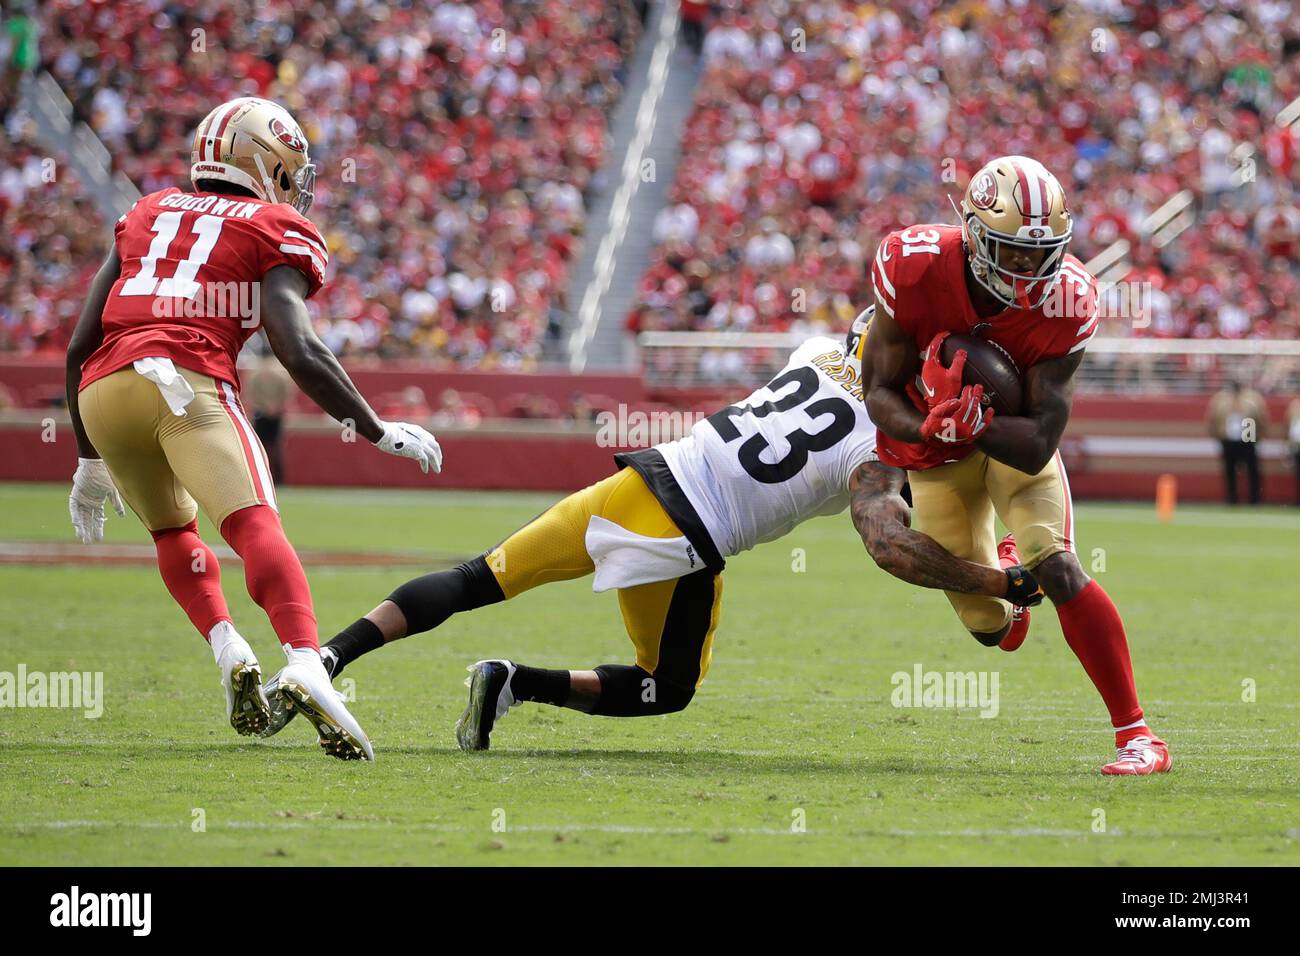 Why is 49ers-Steelers game blacked out on TV in Sacramento?